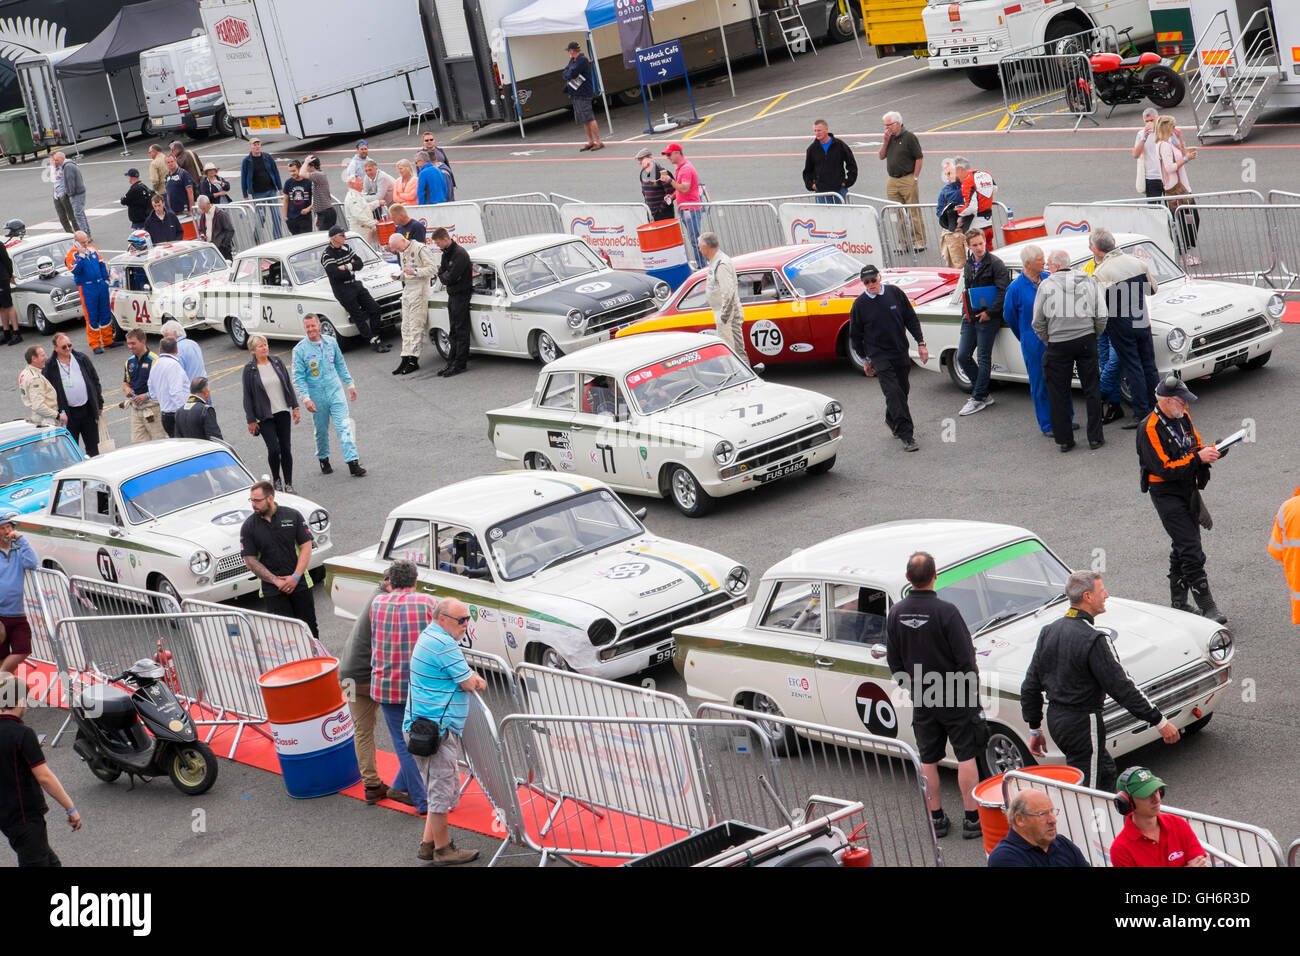 Ford Lotus Cortina saloon cars lined up in the paddock, 2016 Silverstone Classic event, England, UK Stock Photo